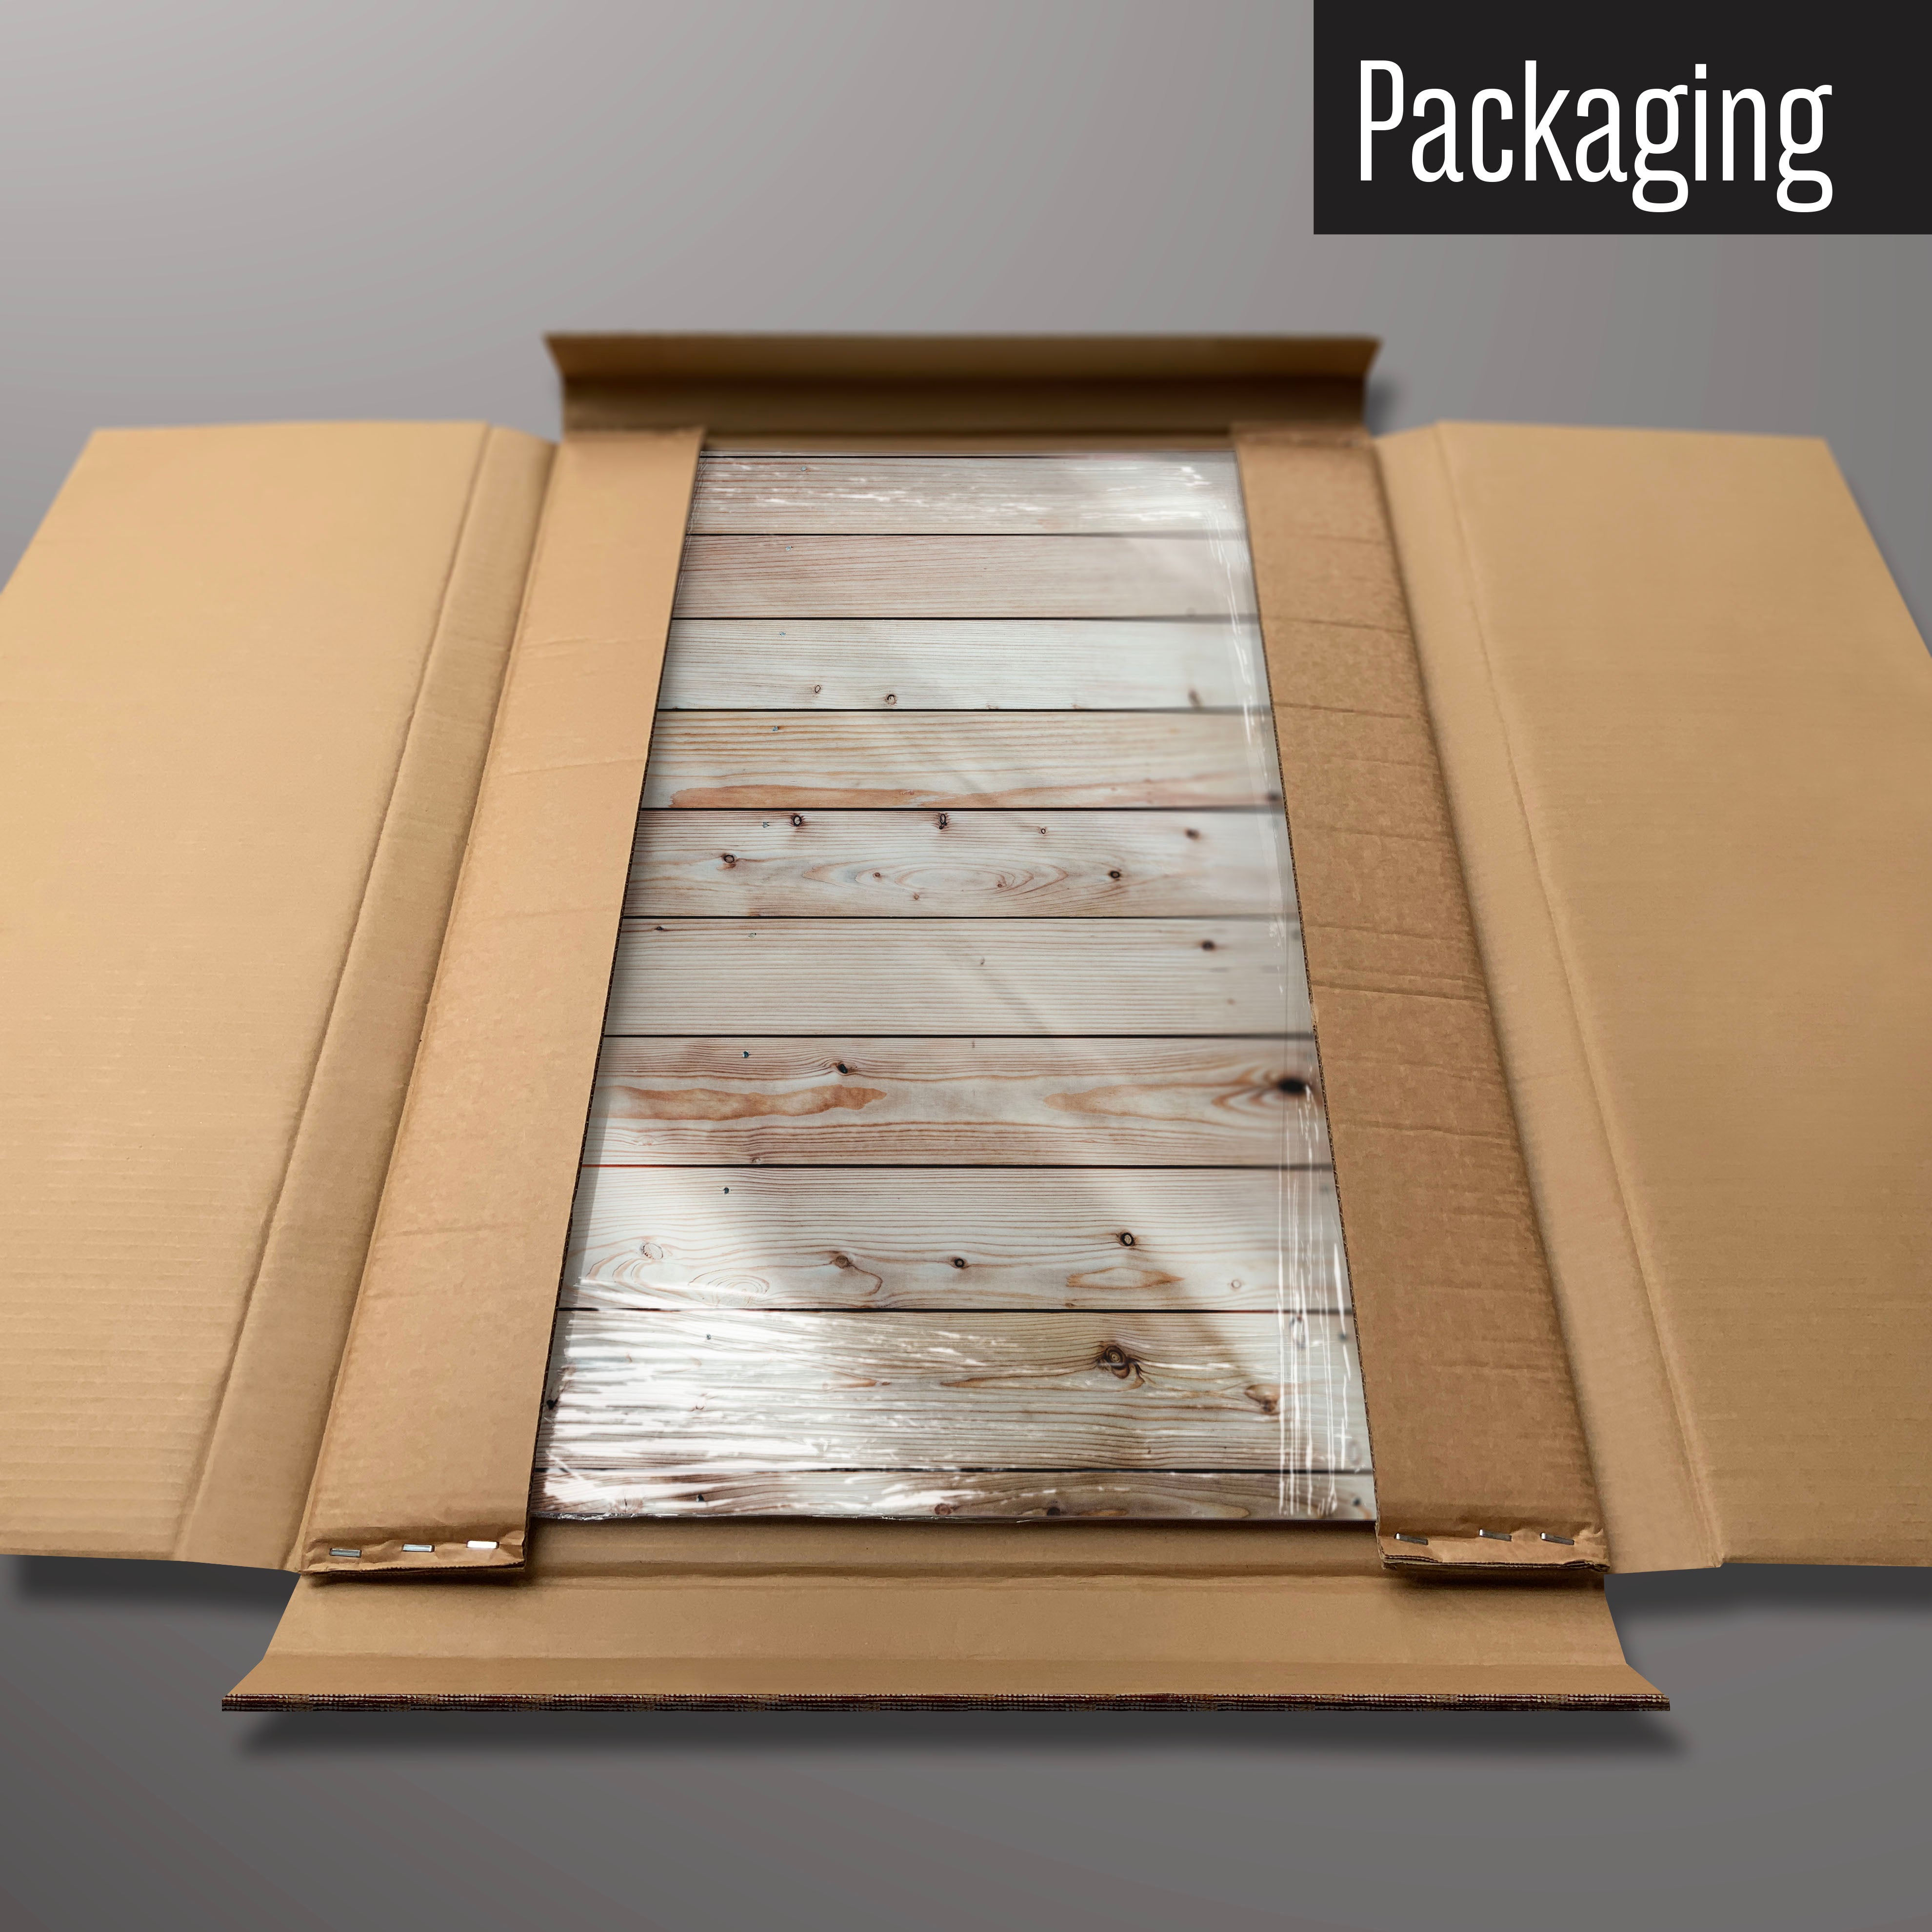 A wood cladding magnetic board in it’s cardboard packaging